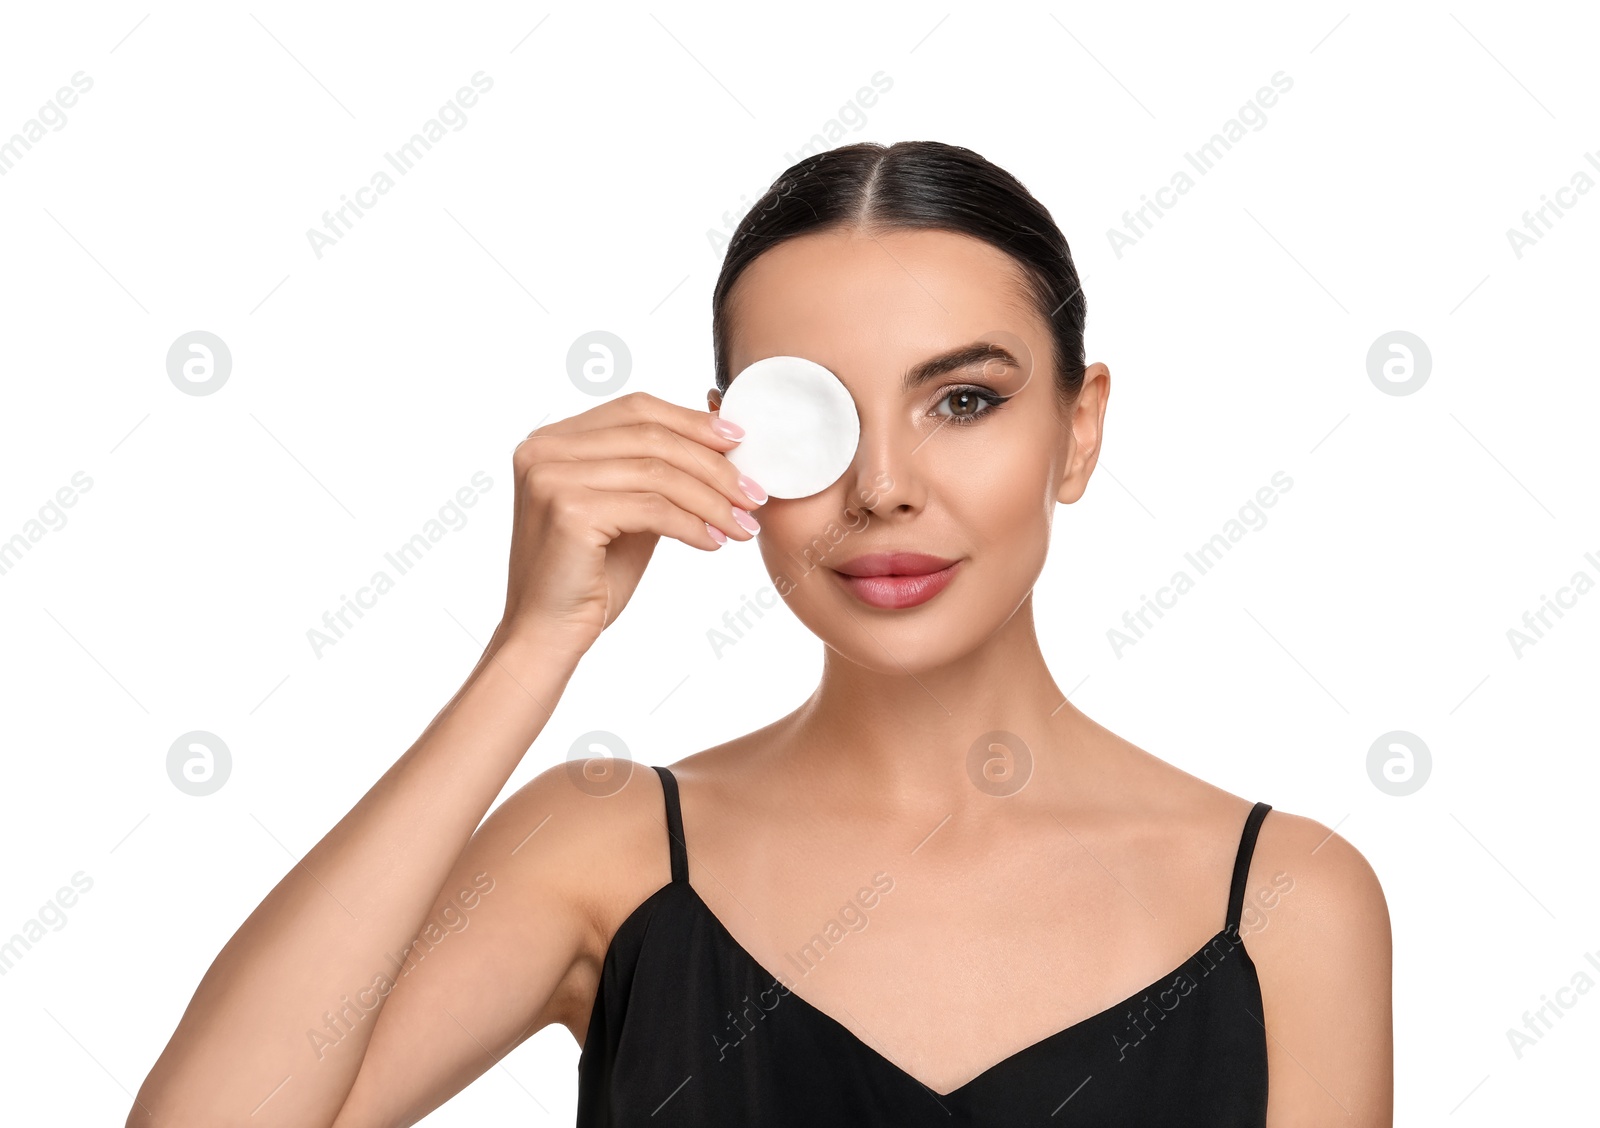 Photo of Beautiful woman removing makeup with cotton pad on white background